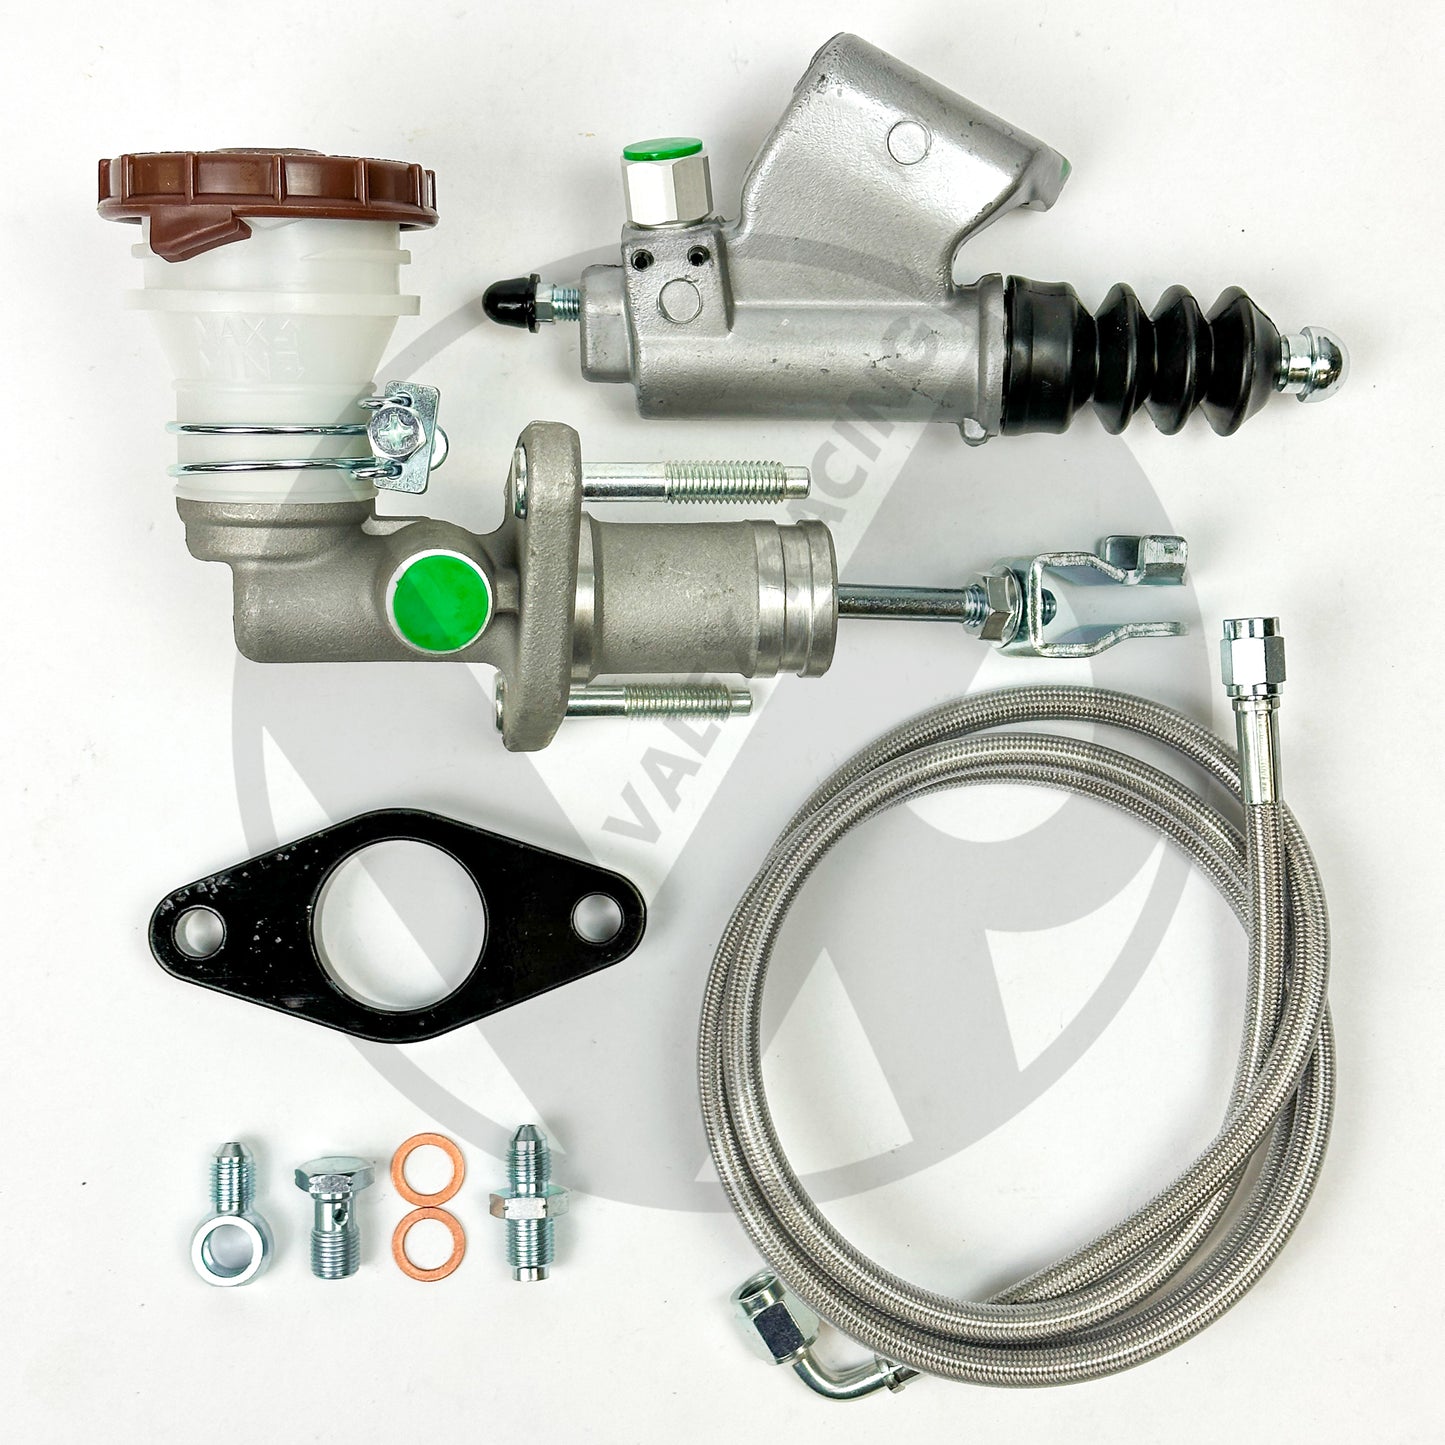 S2000 (S2K) Style Clutch Master Cylinder (CMC) & Exedy Slave Cylinder Kit with Stainless Steel Clutch Line for K Swap